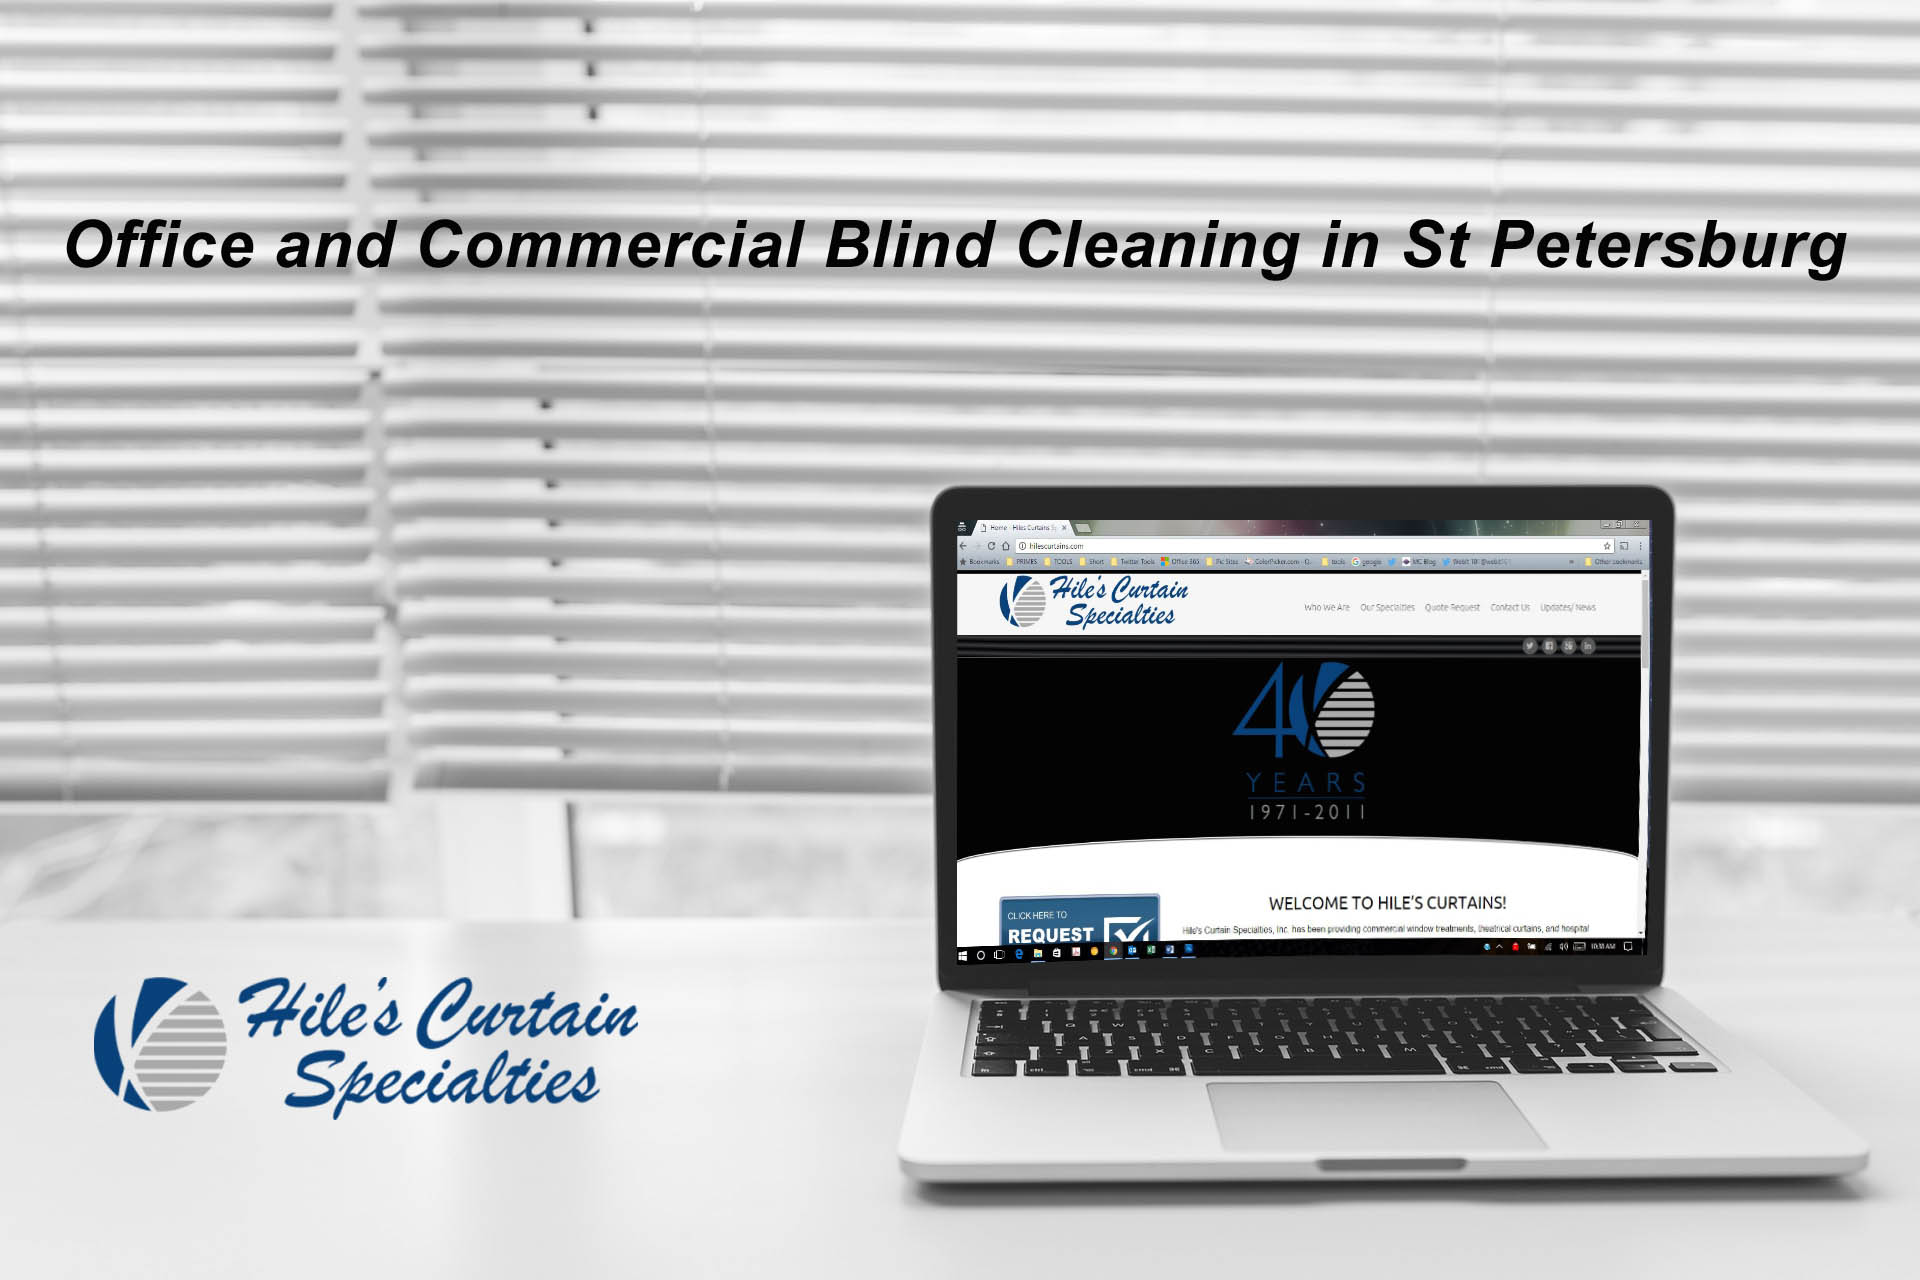 Office and Commercial Blind Cleaning in St Petersburg Florida